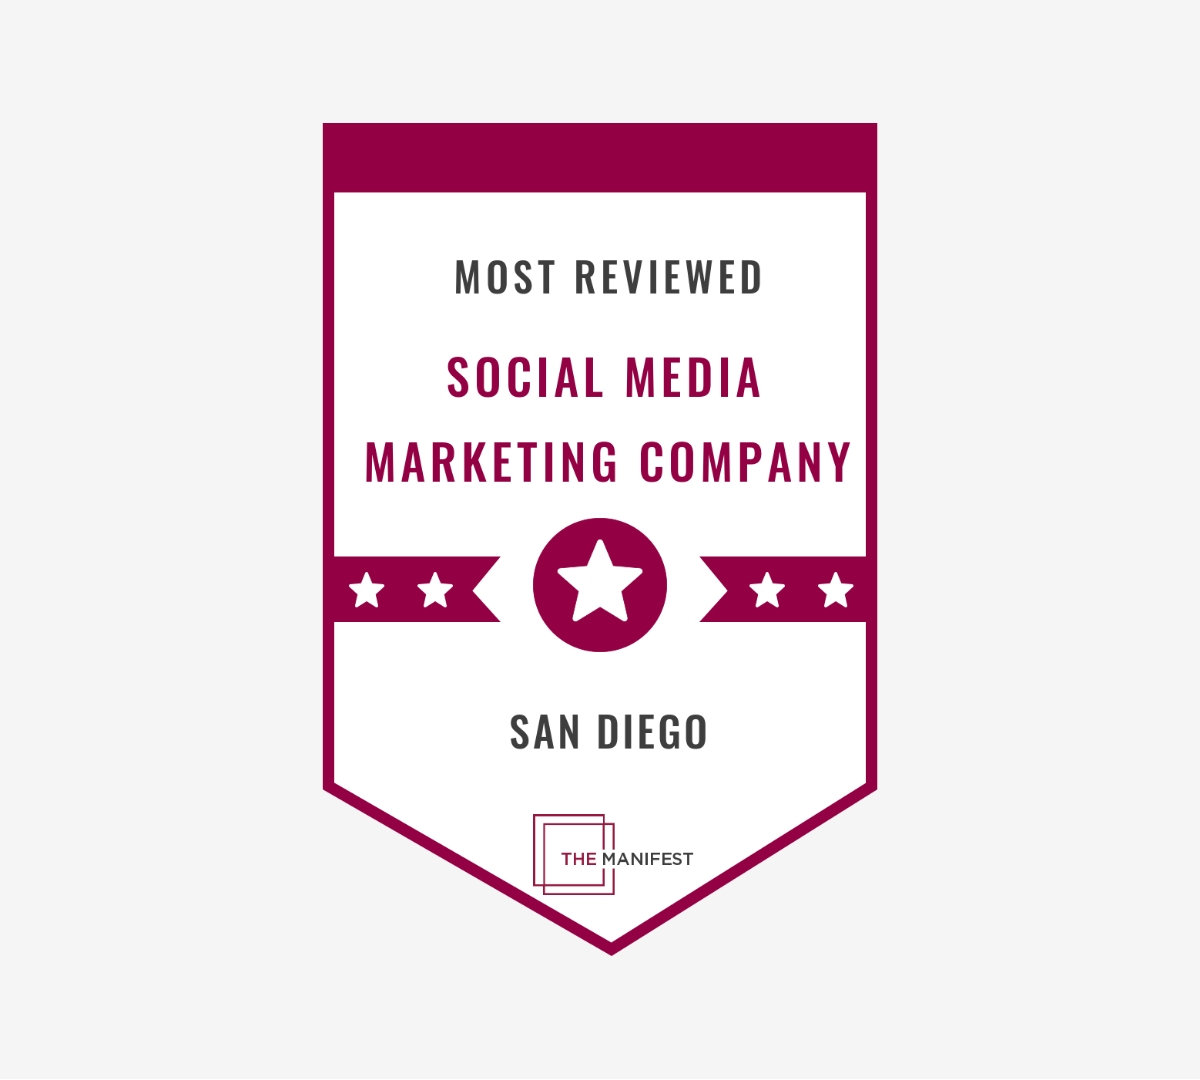 The Manifest Names Noble Intent Studio as one of the Most Reviewed Social Media Agencies in San Diego